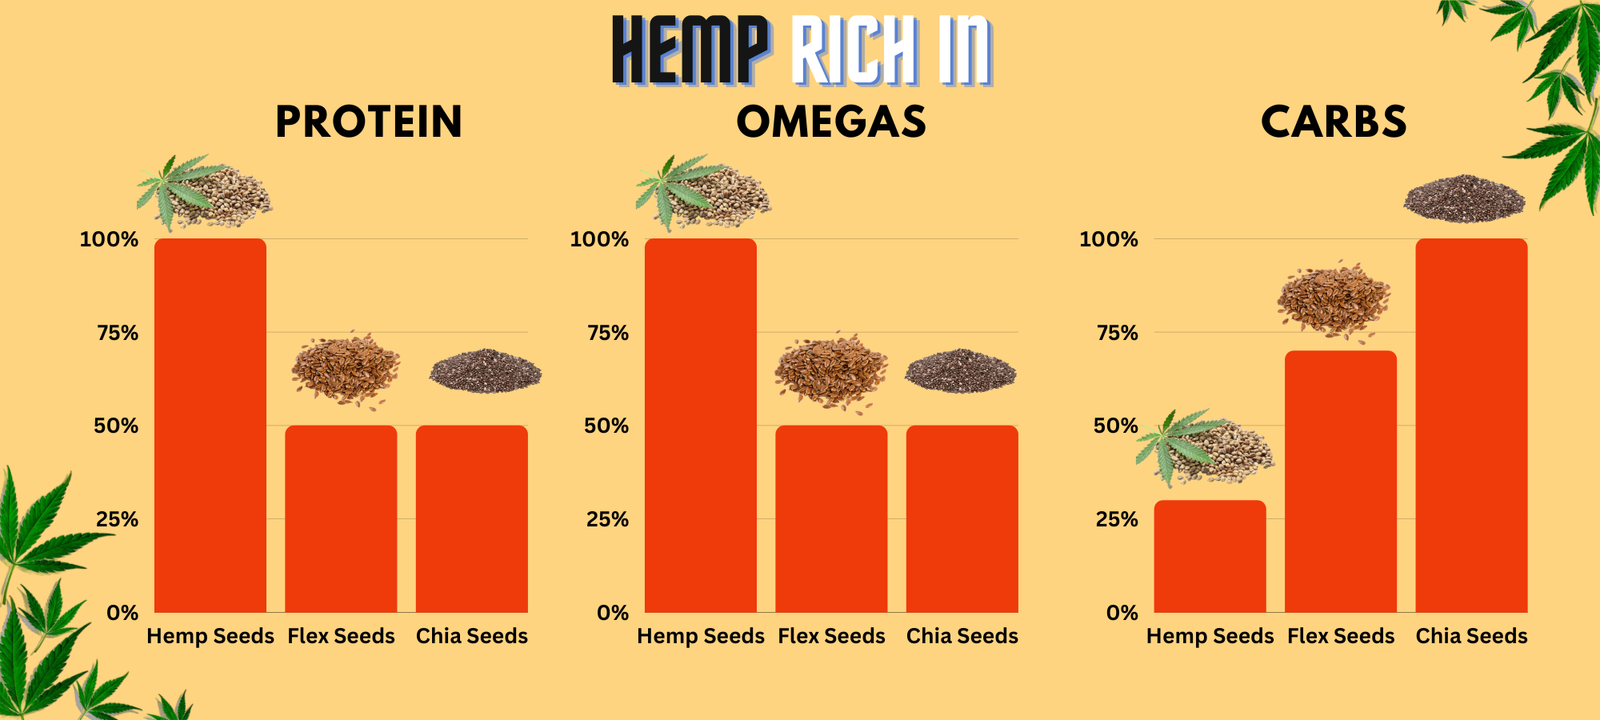 Cure By Design Hemp Rich in Protein Vs Omegas Vs Carbs